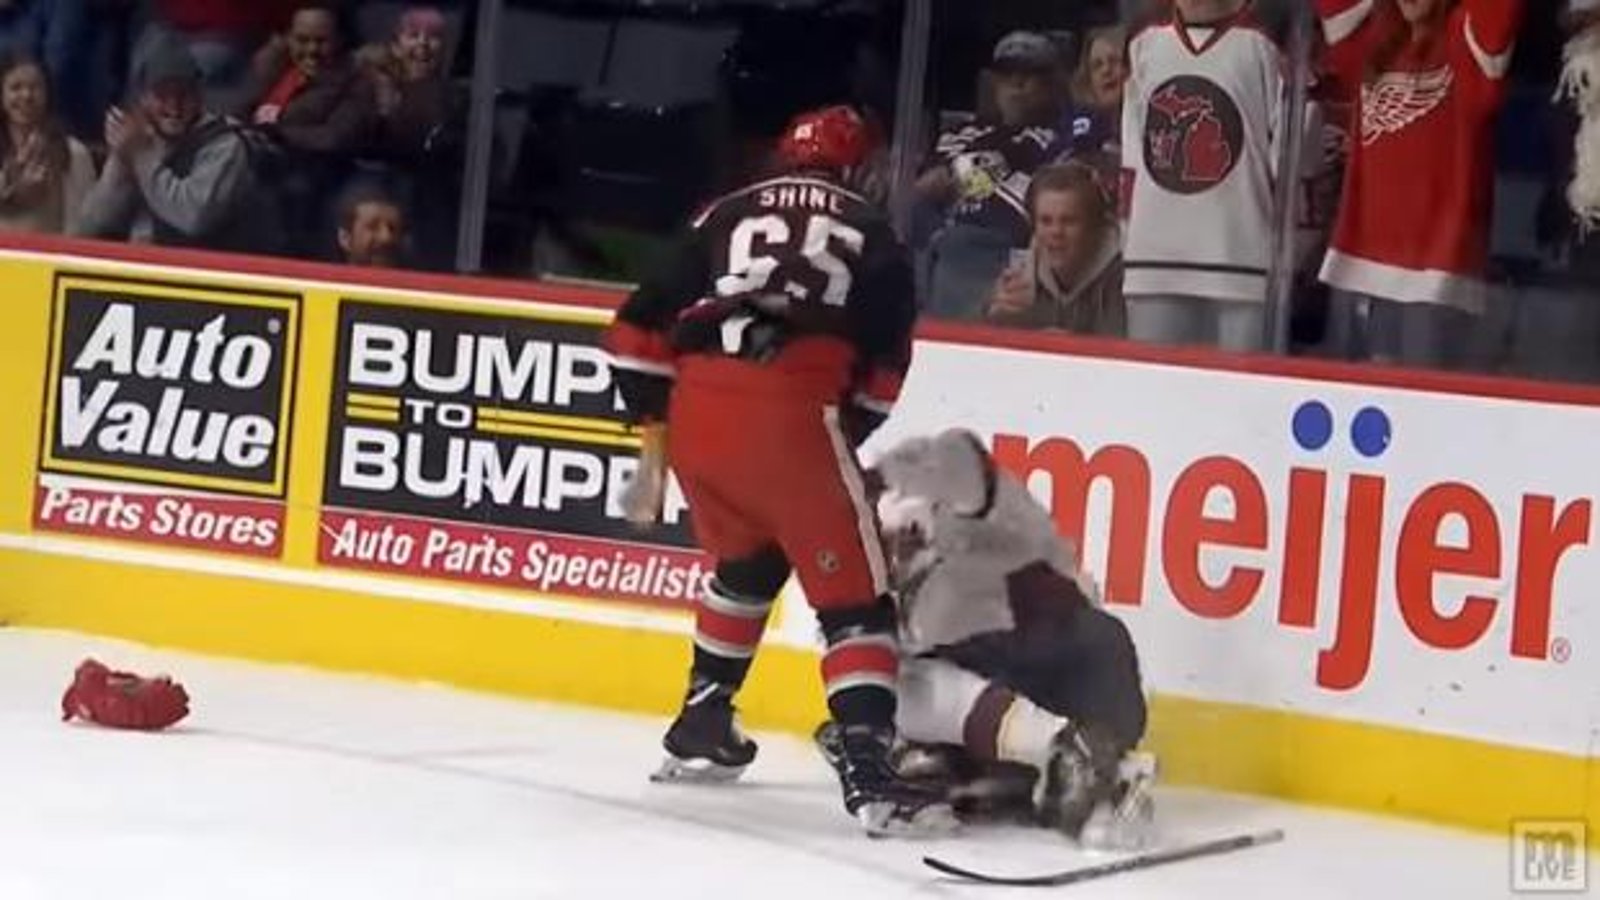 Young forward delivers brutal 3-punch knockout after running over the goalie! 